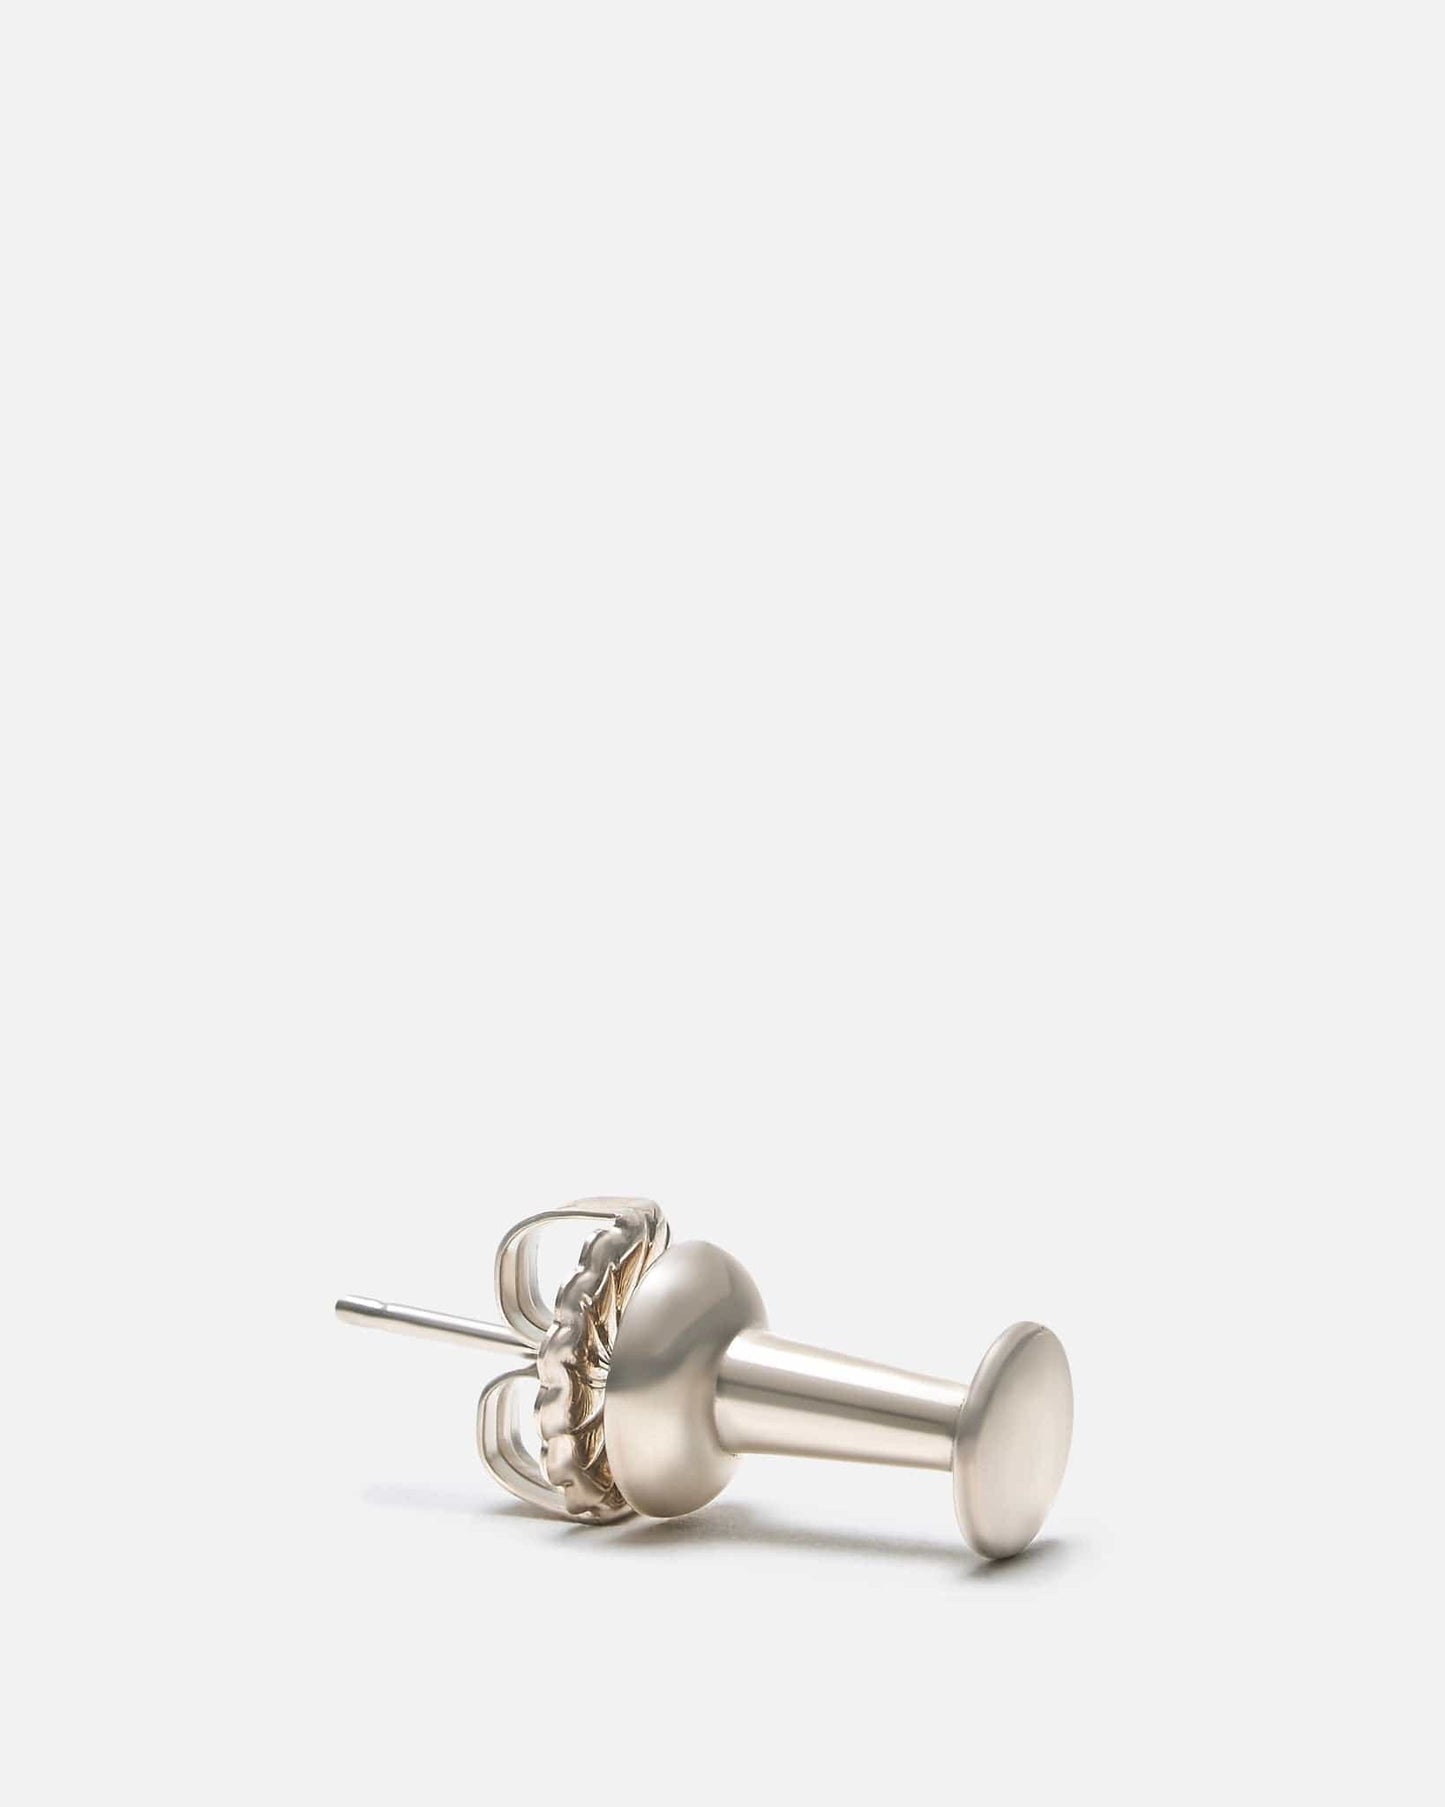 Secret of Manna Jewelry O/S Push Pin Earring in Silver